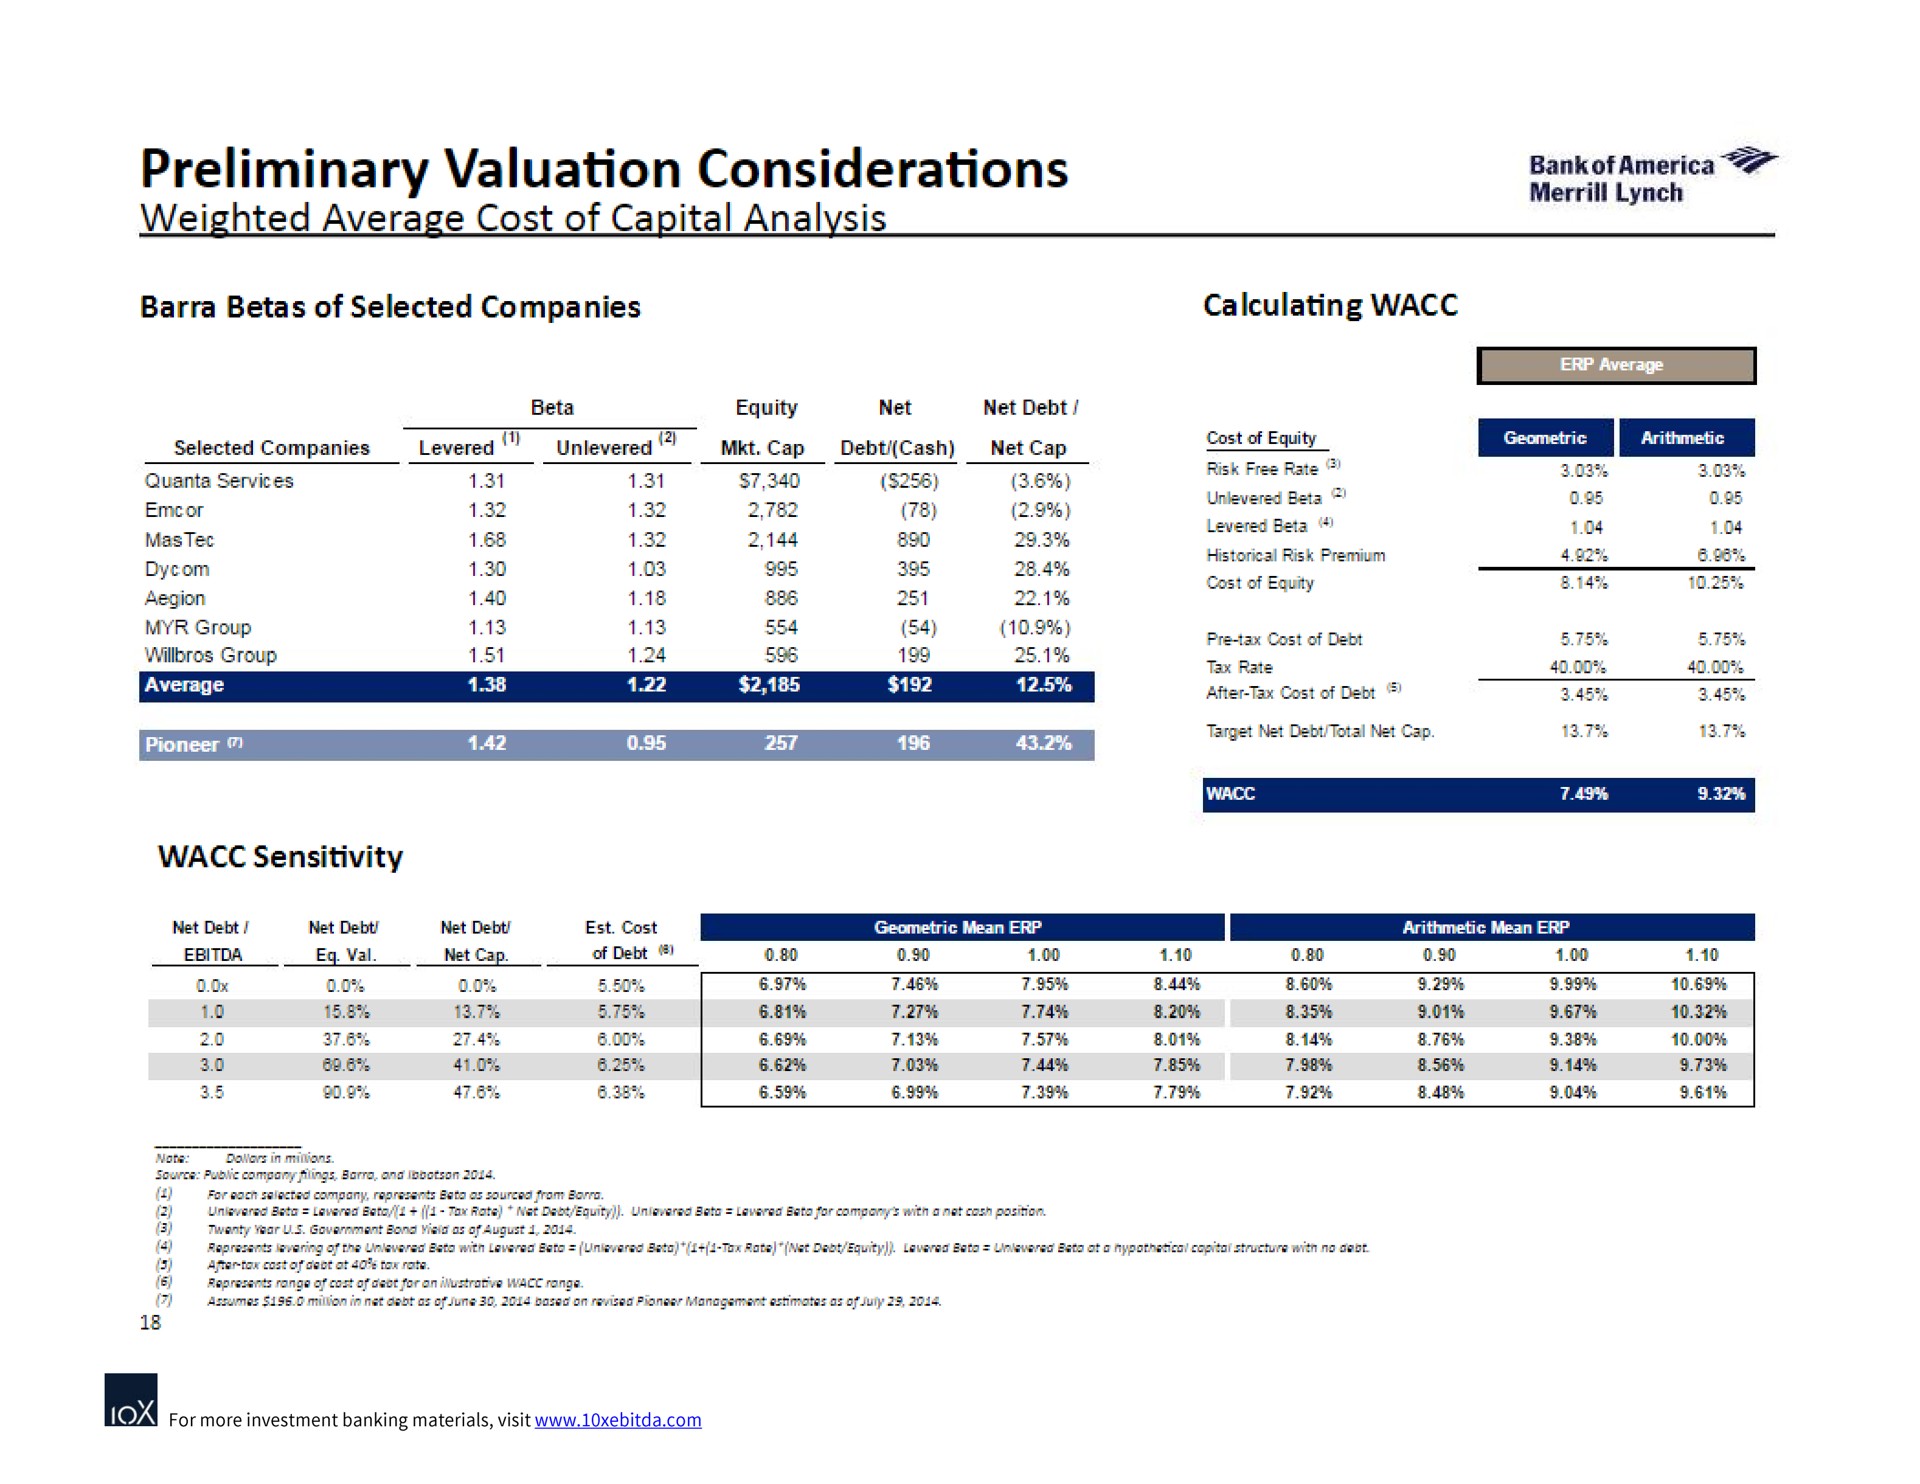 preliminary valuation considerations weighted average cost of capital analysis | Bank of America